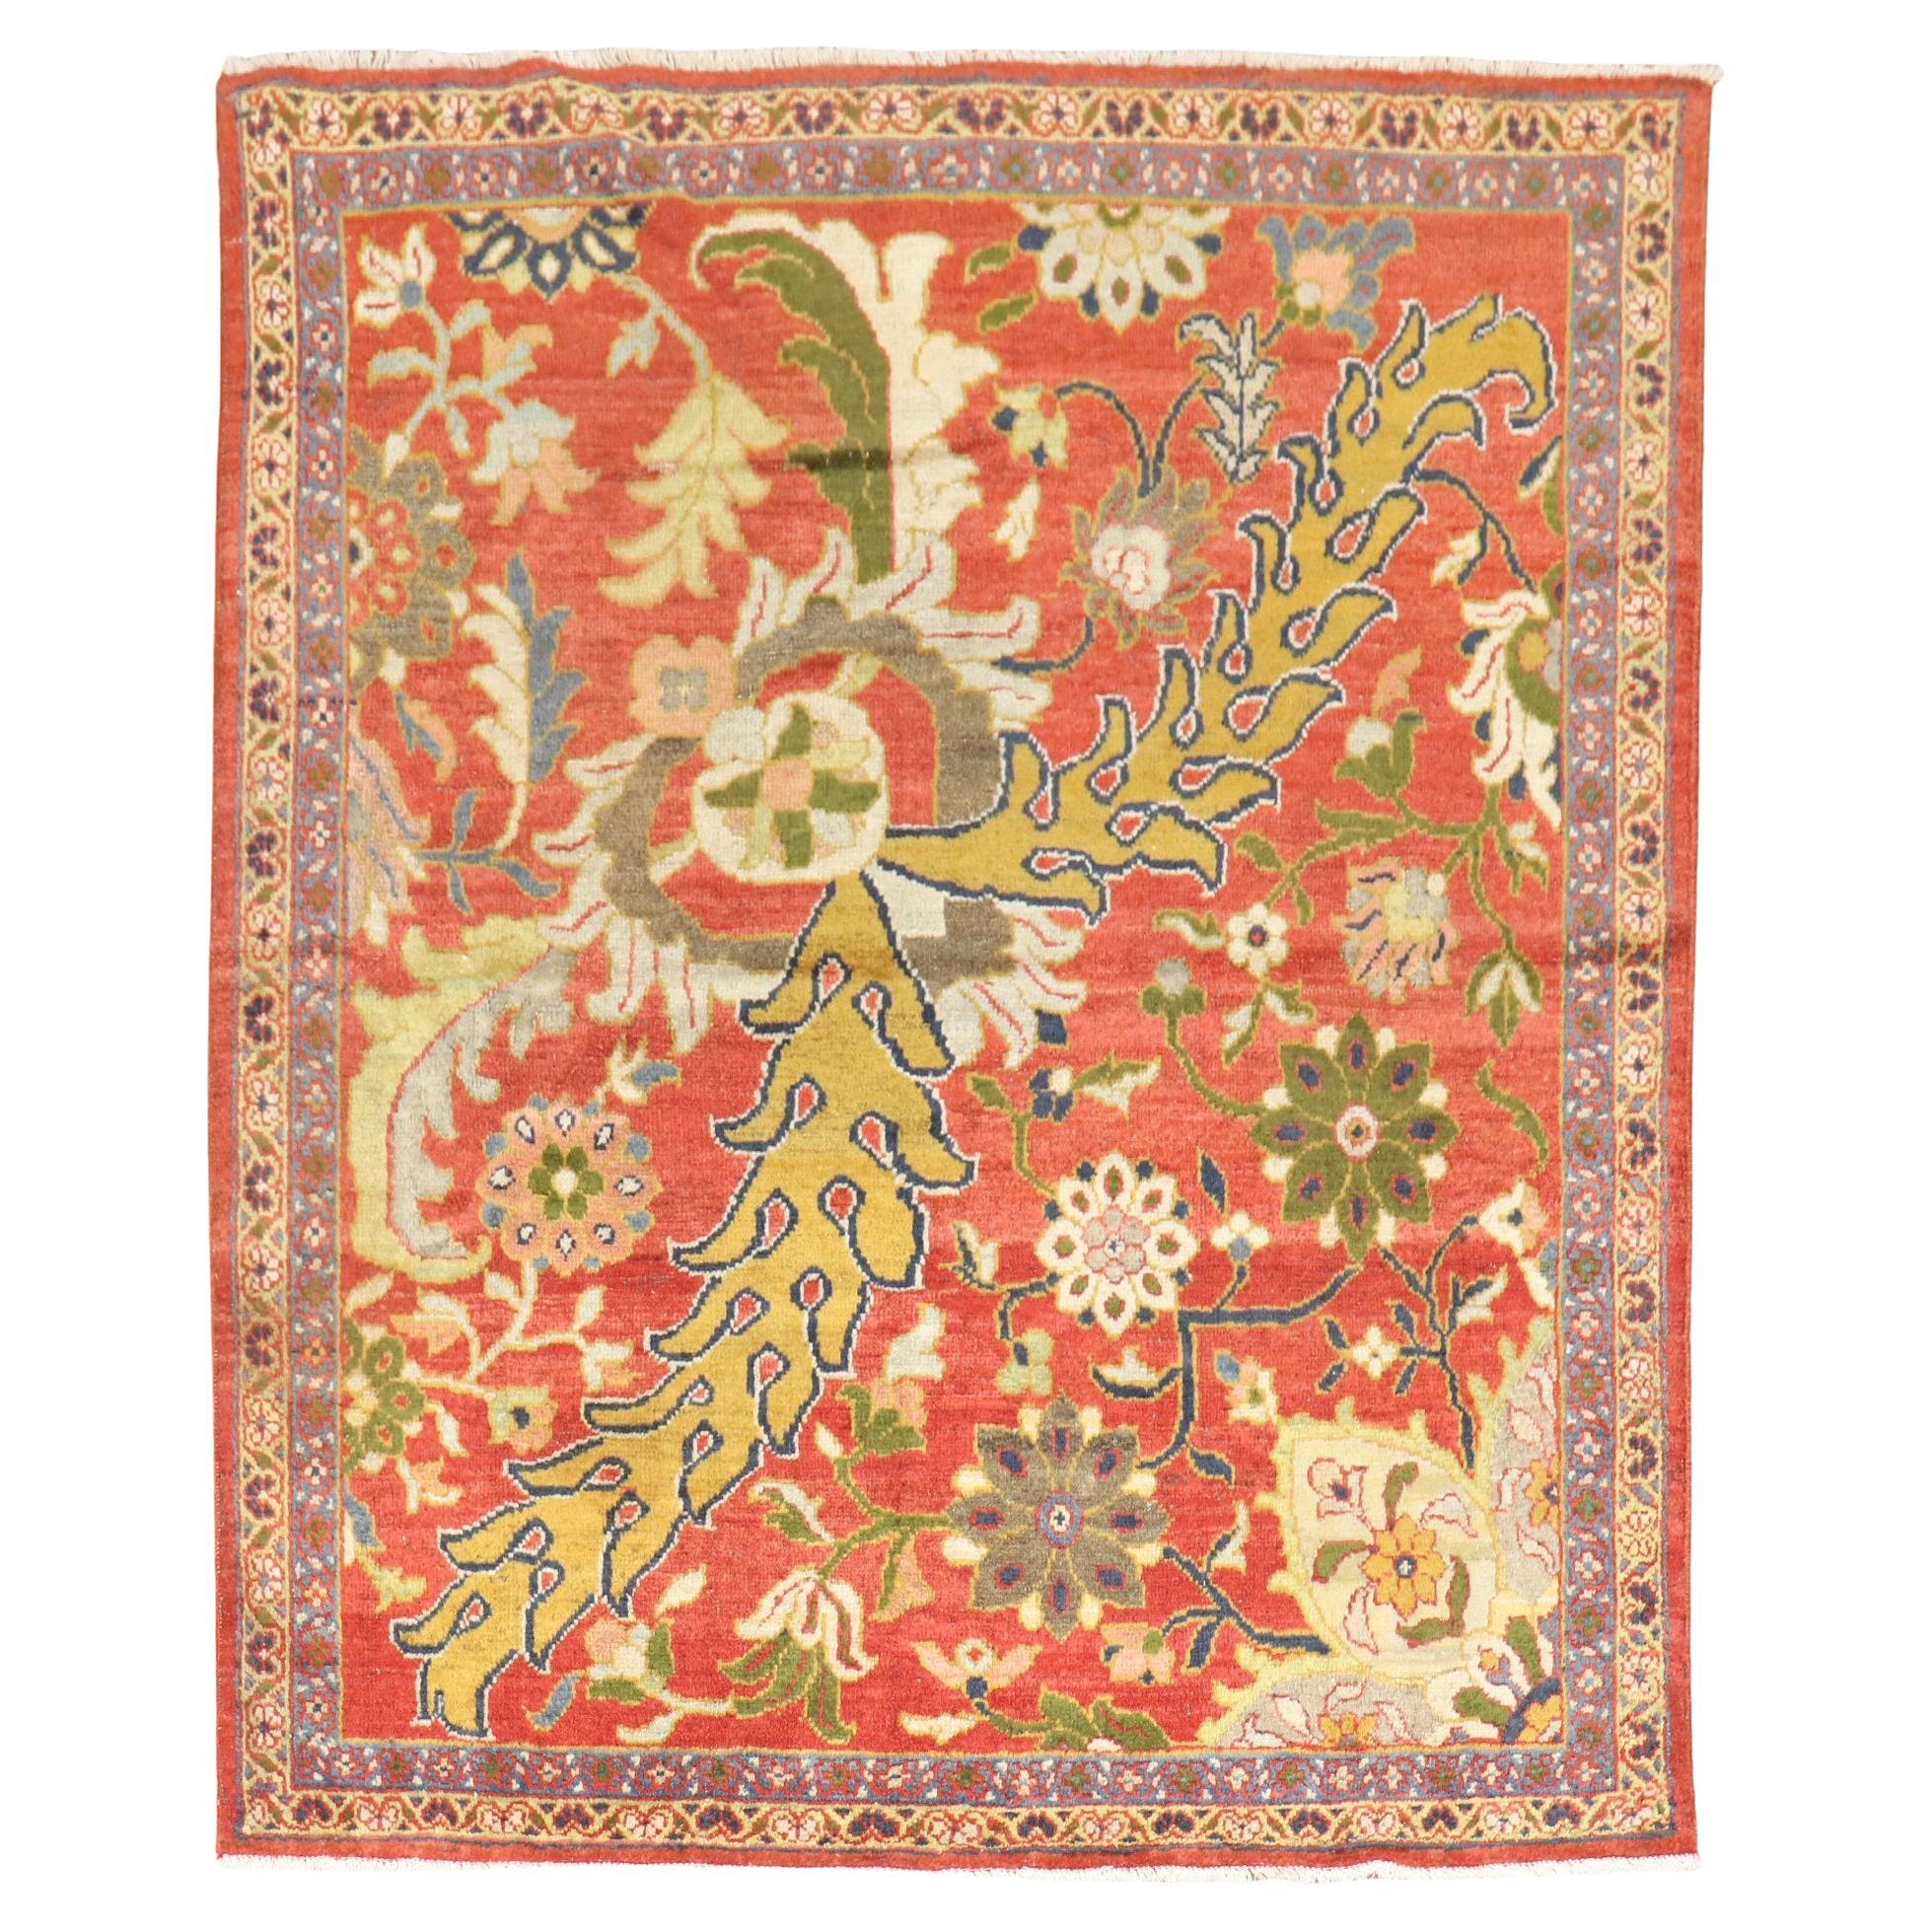 Magnificent Antique Persian Sultanabad Sampler 19th Century Rug For Sale